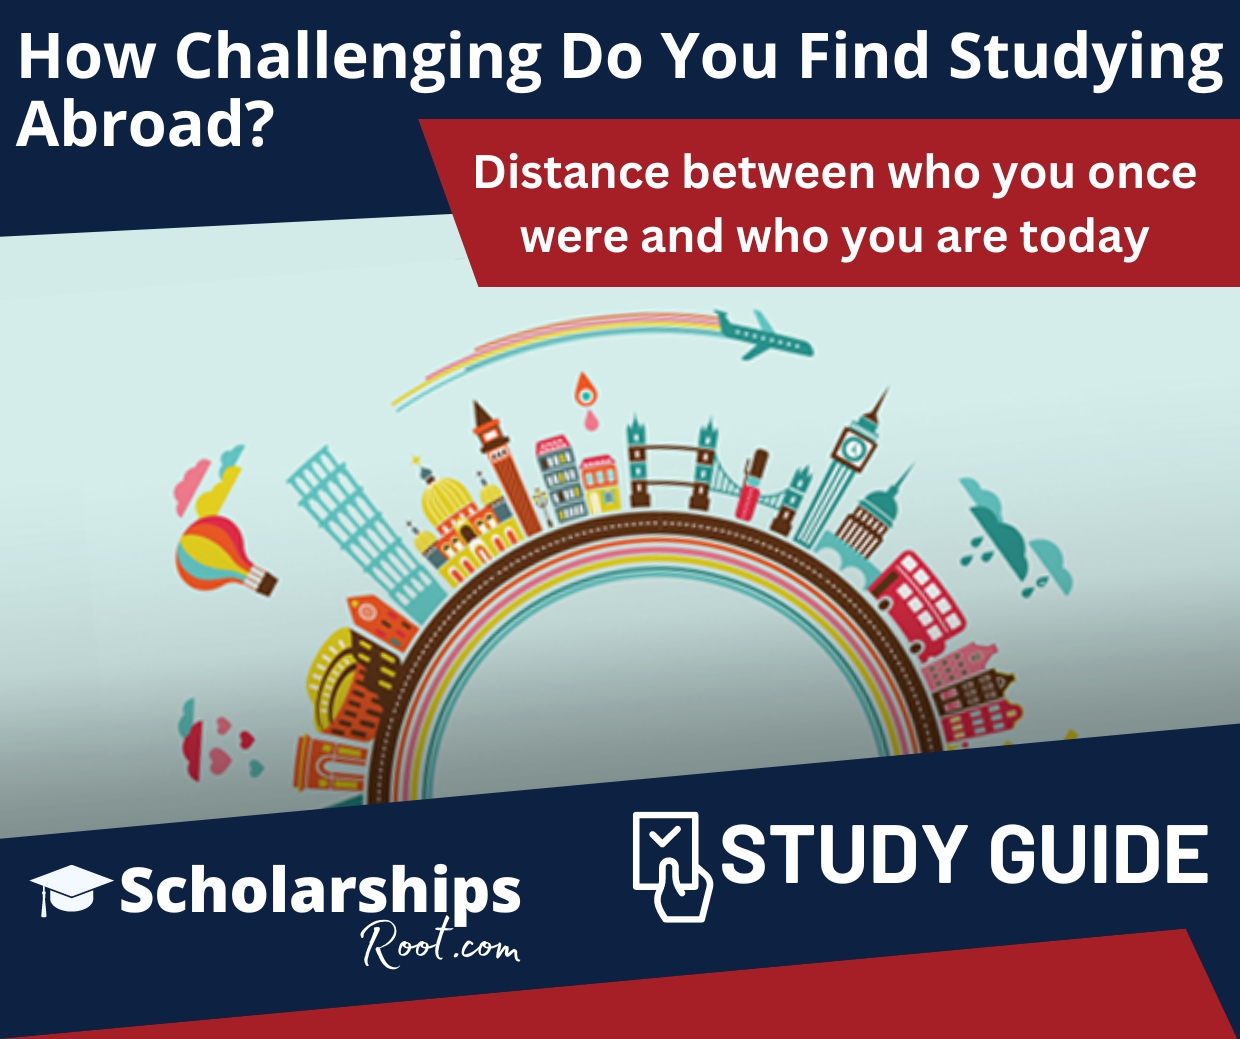 How challenging do you find studying abroad